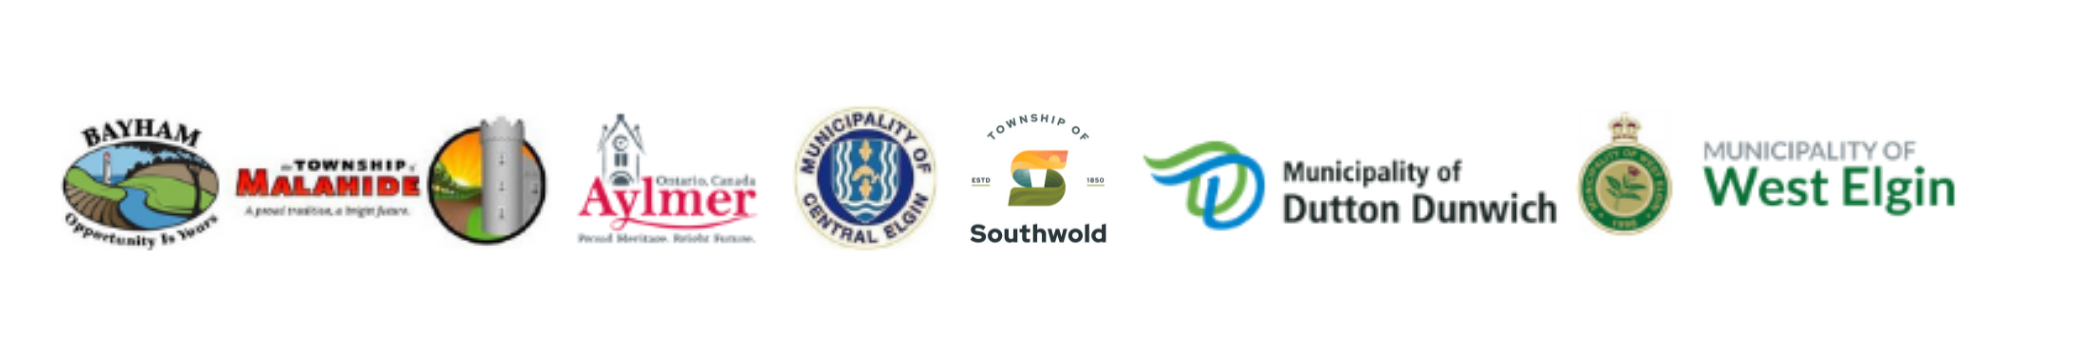 Logos for the Municipality of Bayham, Township of Malahide, Township of Southwold, Municipality of Central Elgin, Town of Aylmer, Municipality of Dutton Dunwich and Municipality of West Elgin